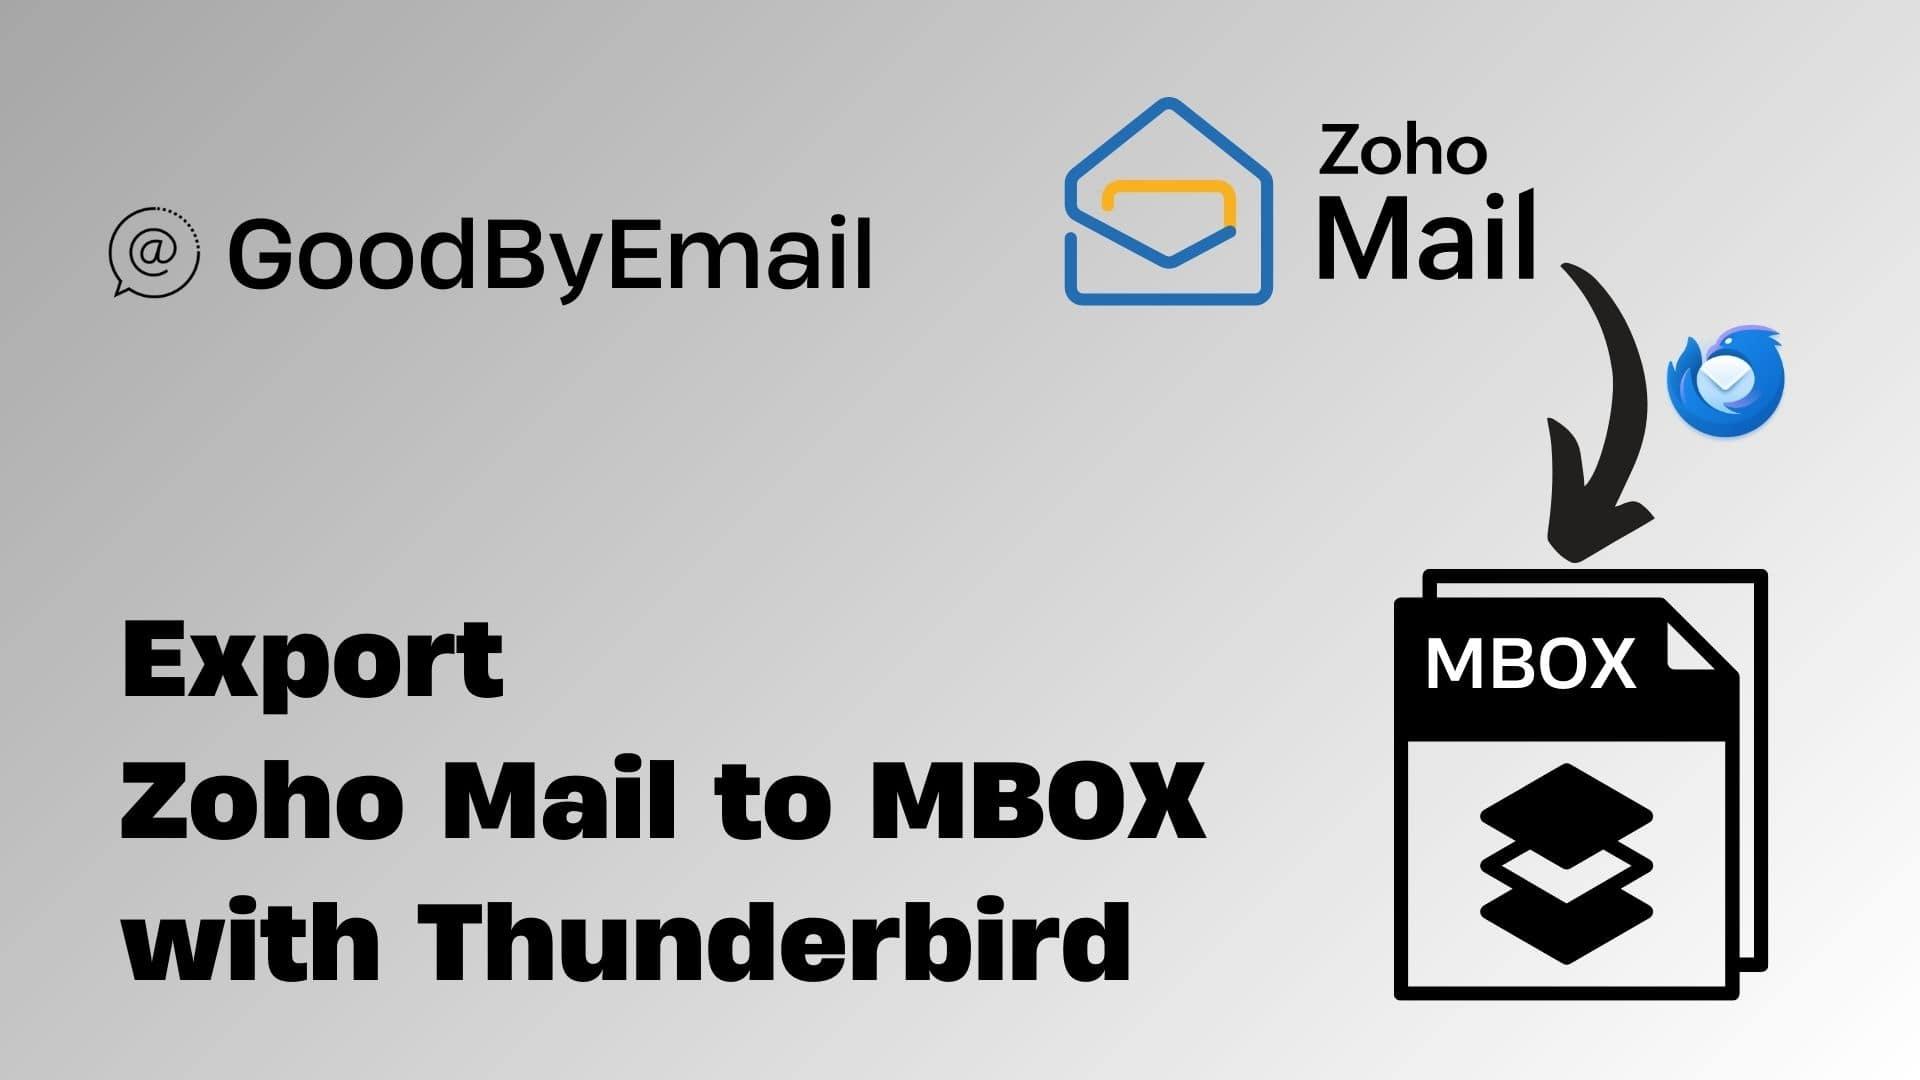 Export Zoho Email Inbox to mbox | GoodByEmail